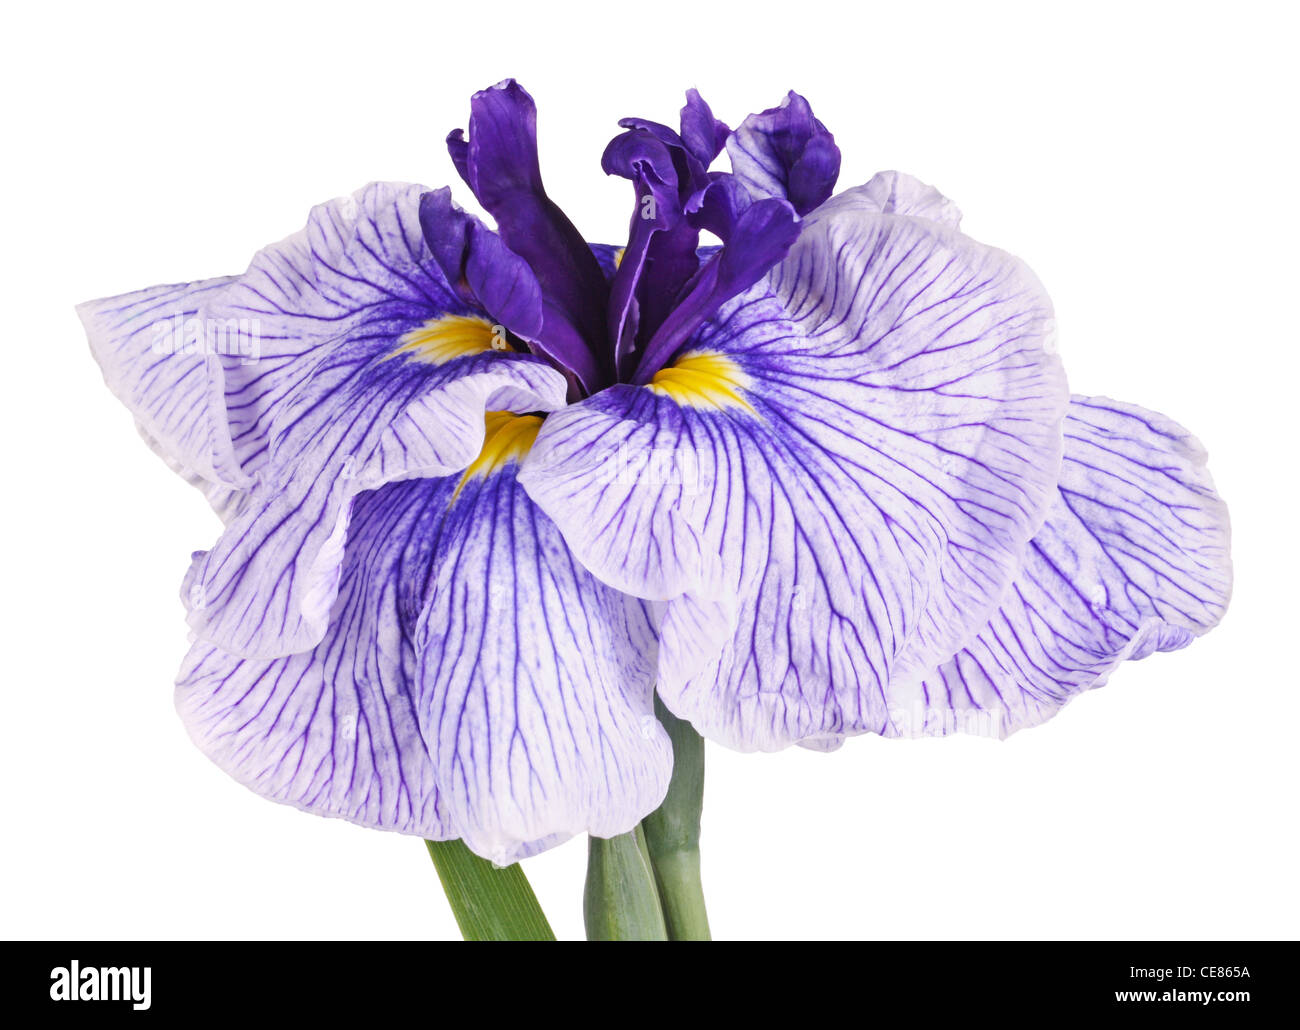 Purple and white flower of a Japanese iris Stock Photo